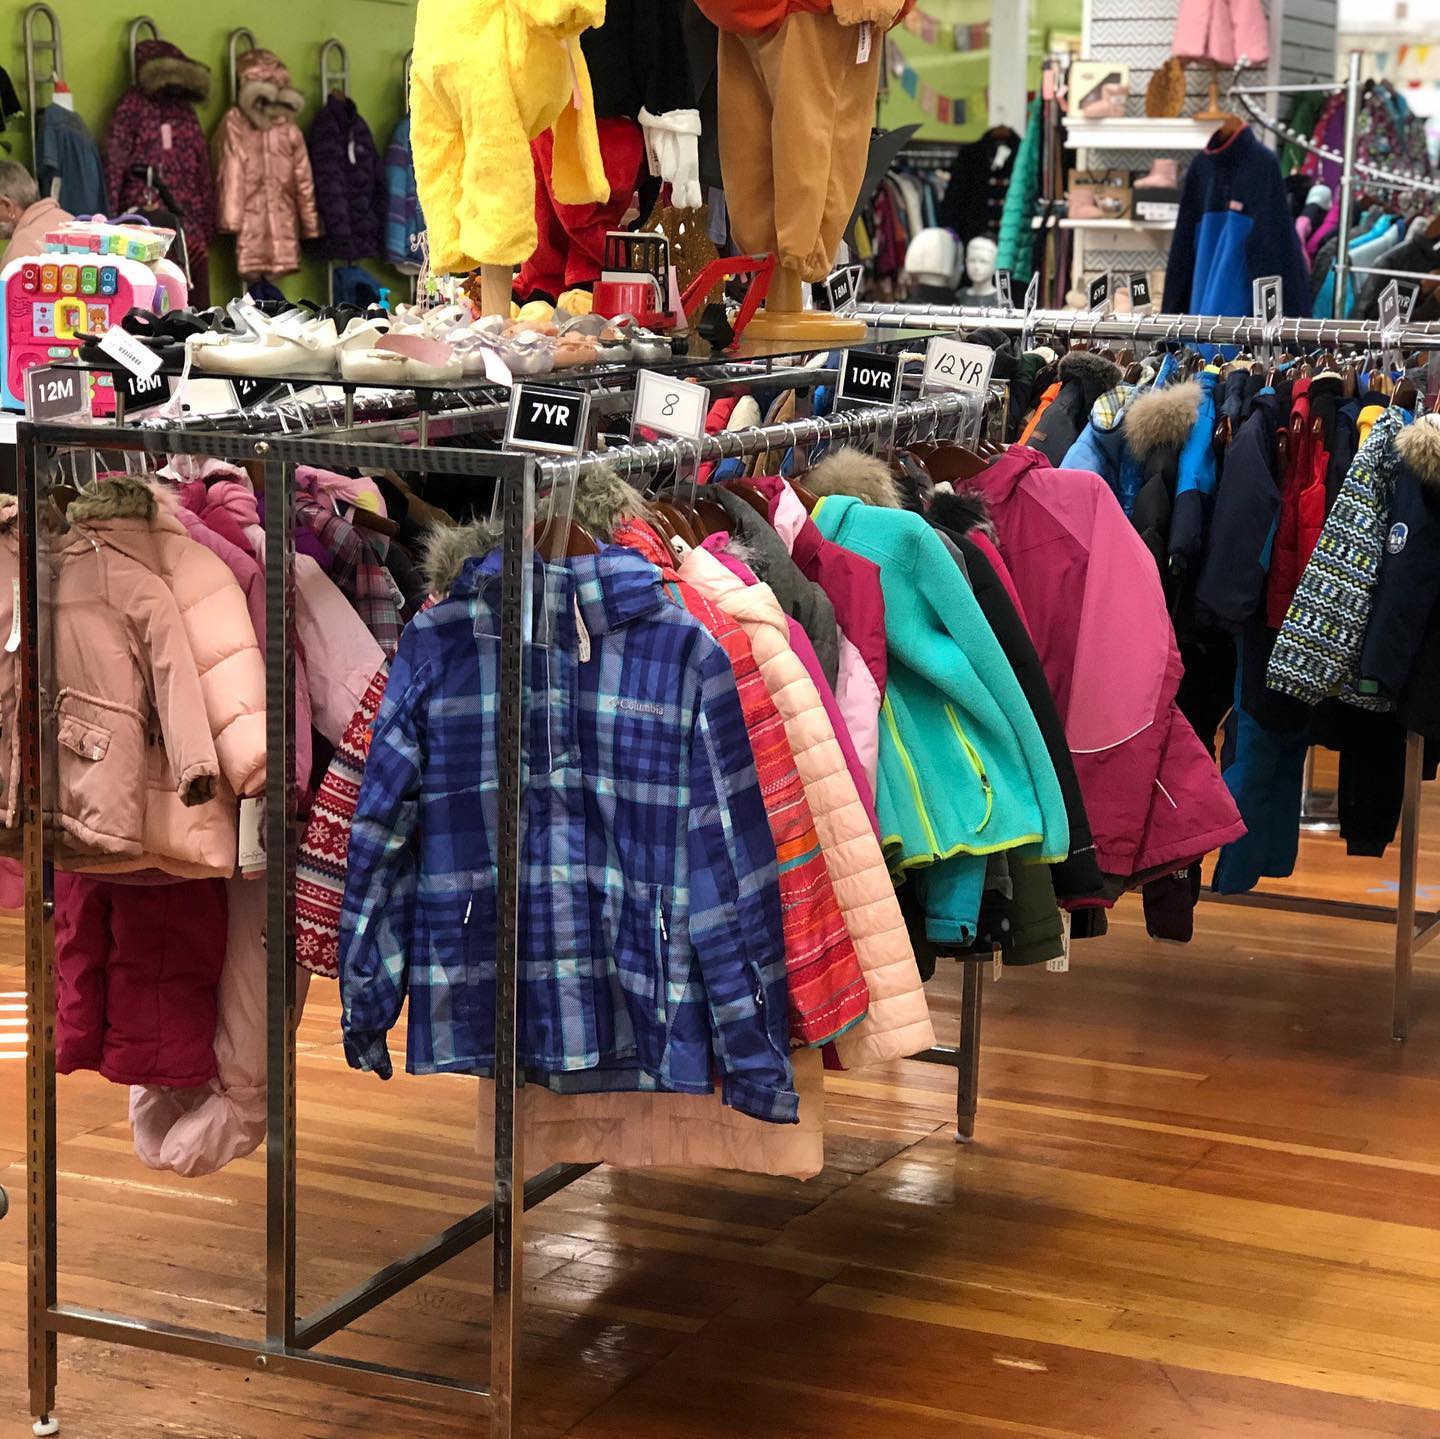 5 Places to Consignment Shop in Rhode Island - Rhode Island Monthly